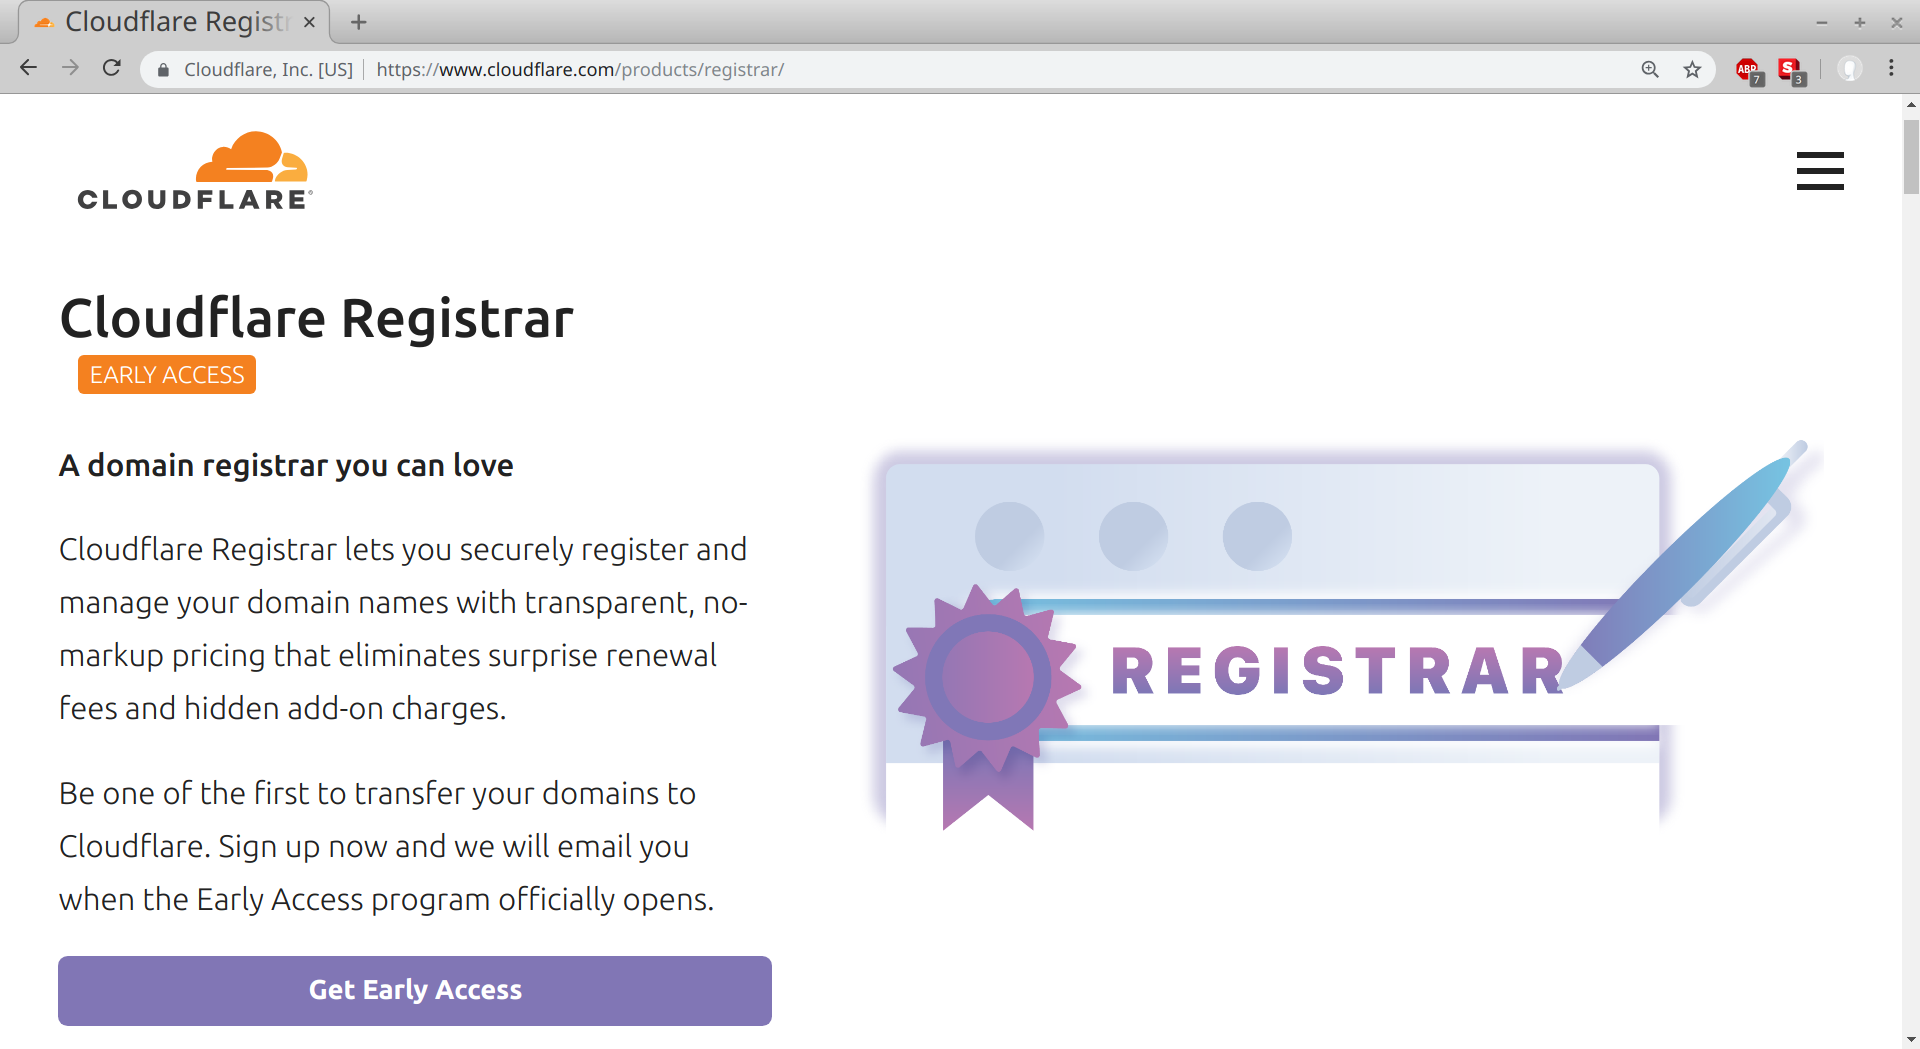 A screenshot of the Cloudflare Registrar product page.